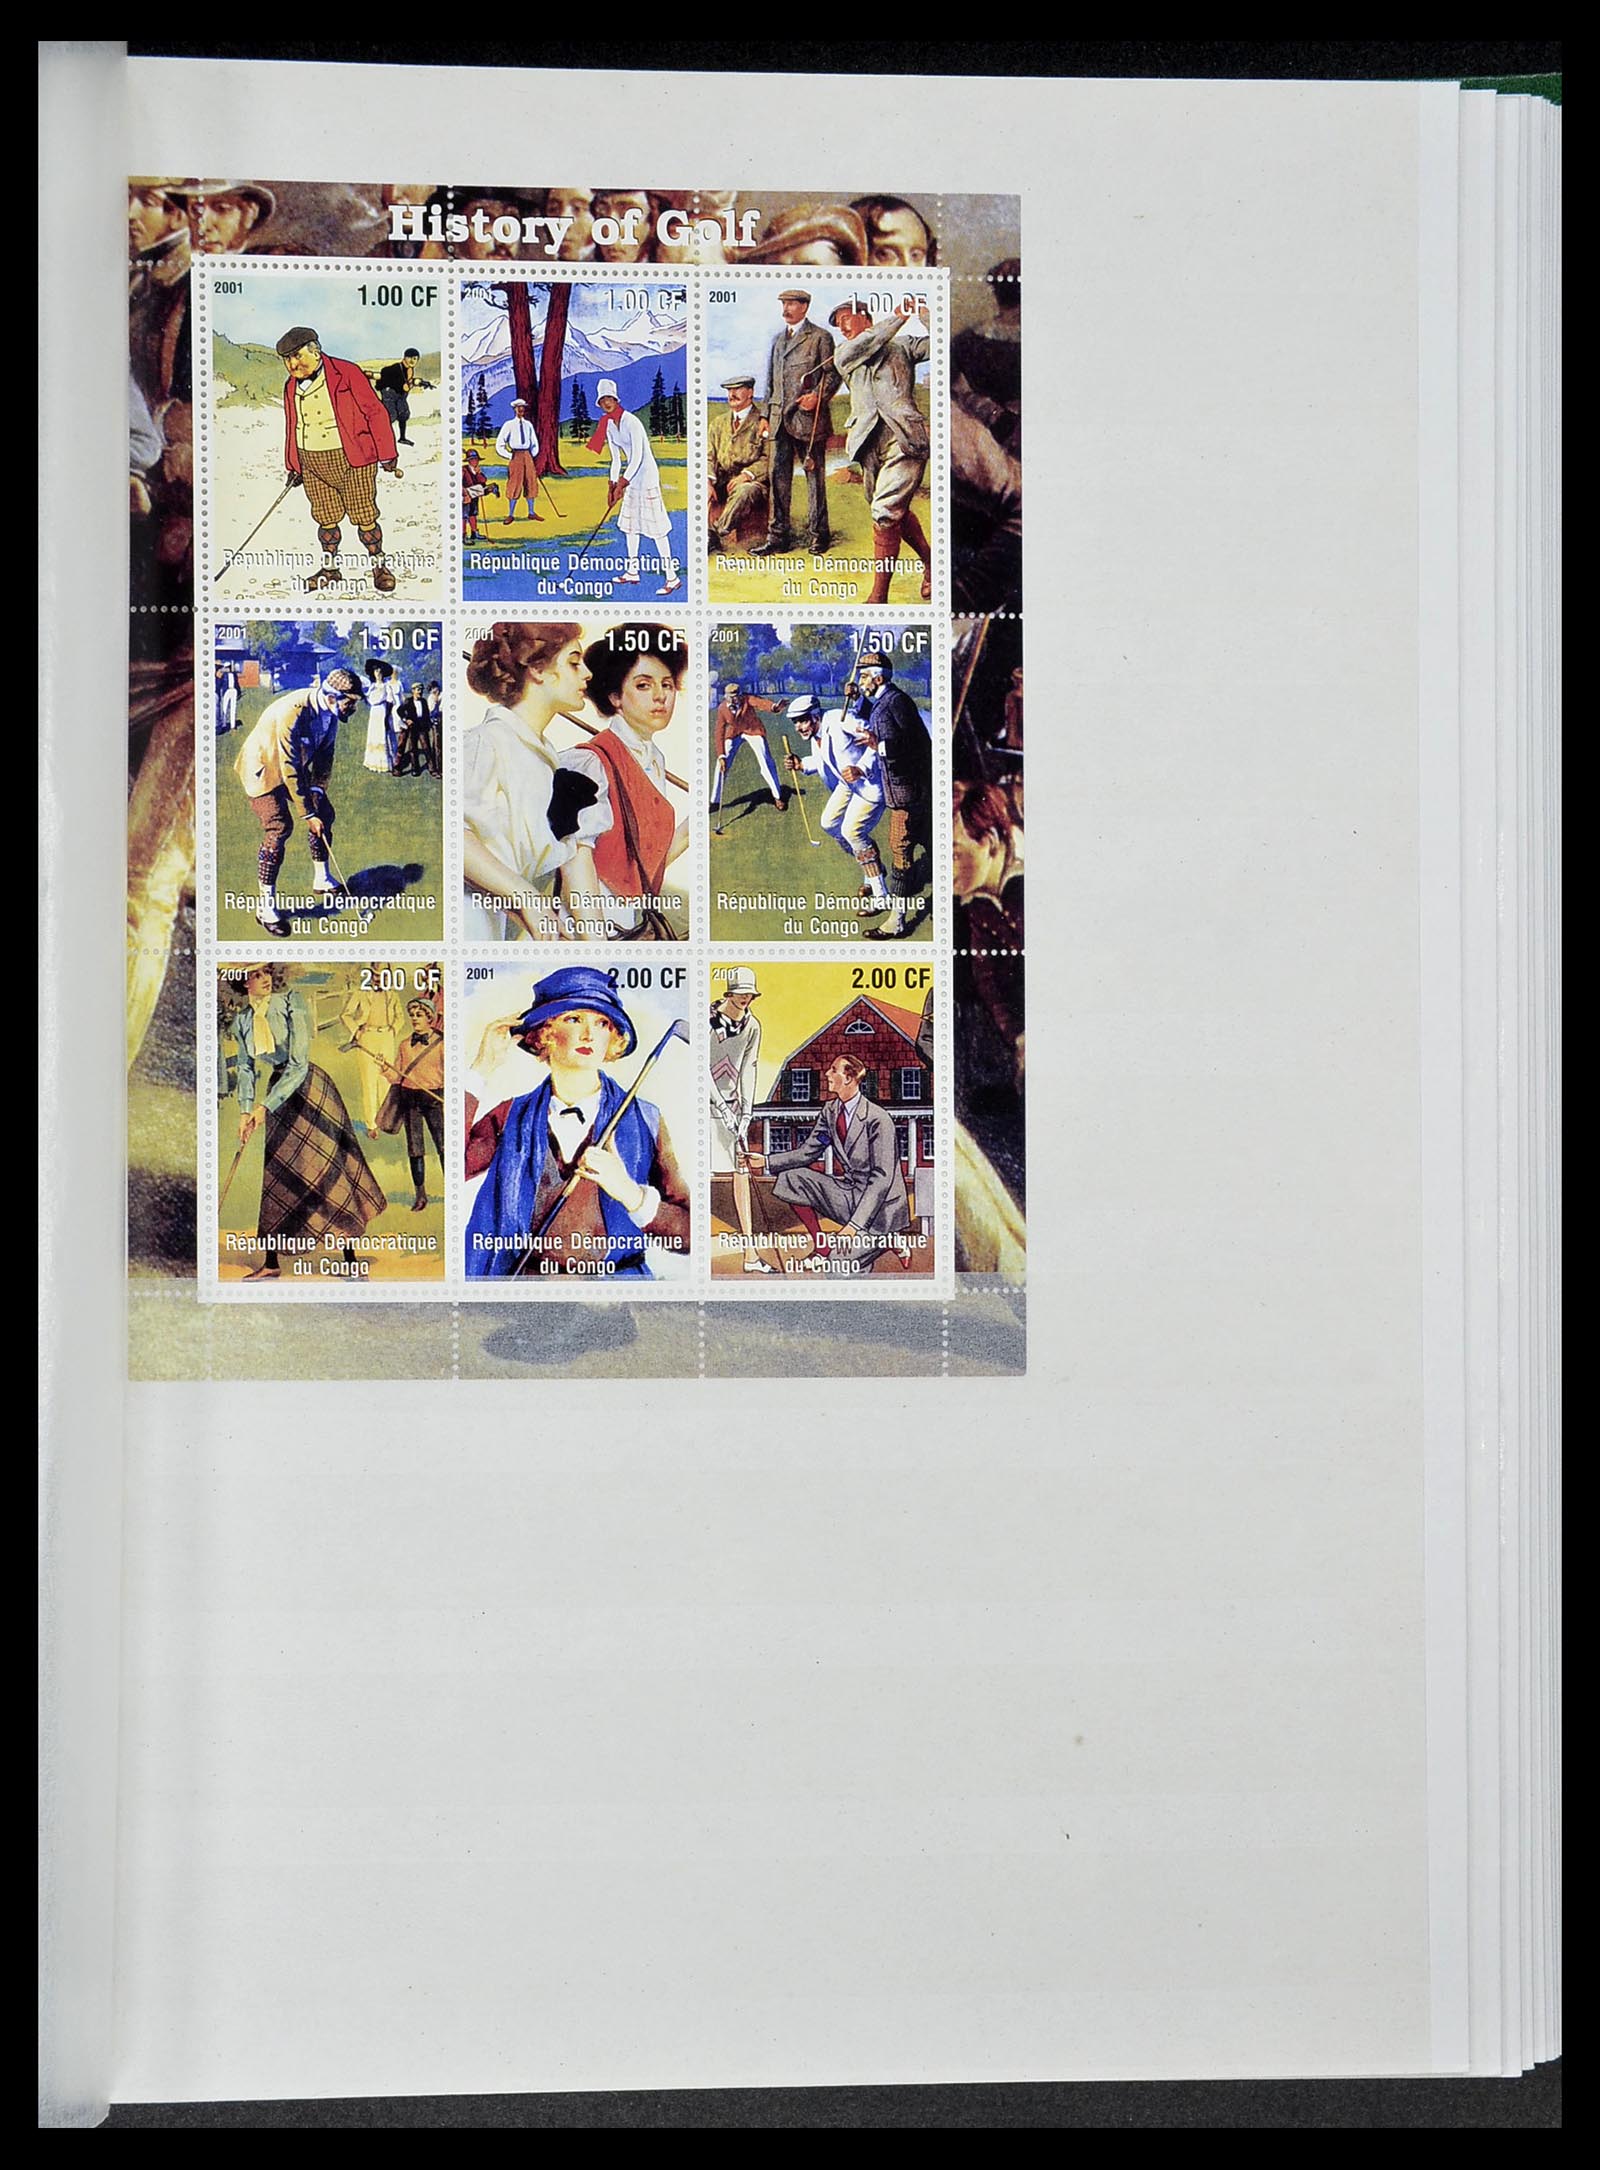 34425 088 - Stamp Collection 34425 Thematics Golf 1959-2012.